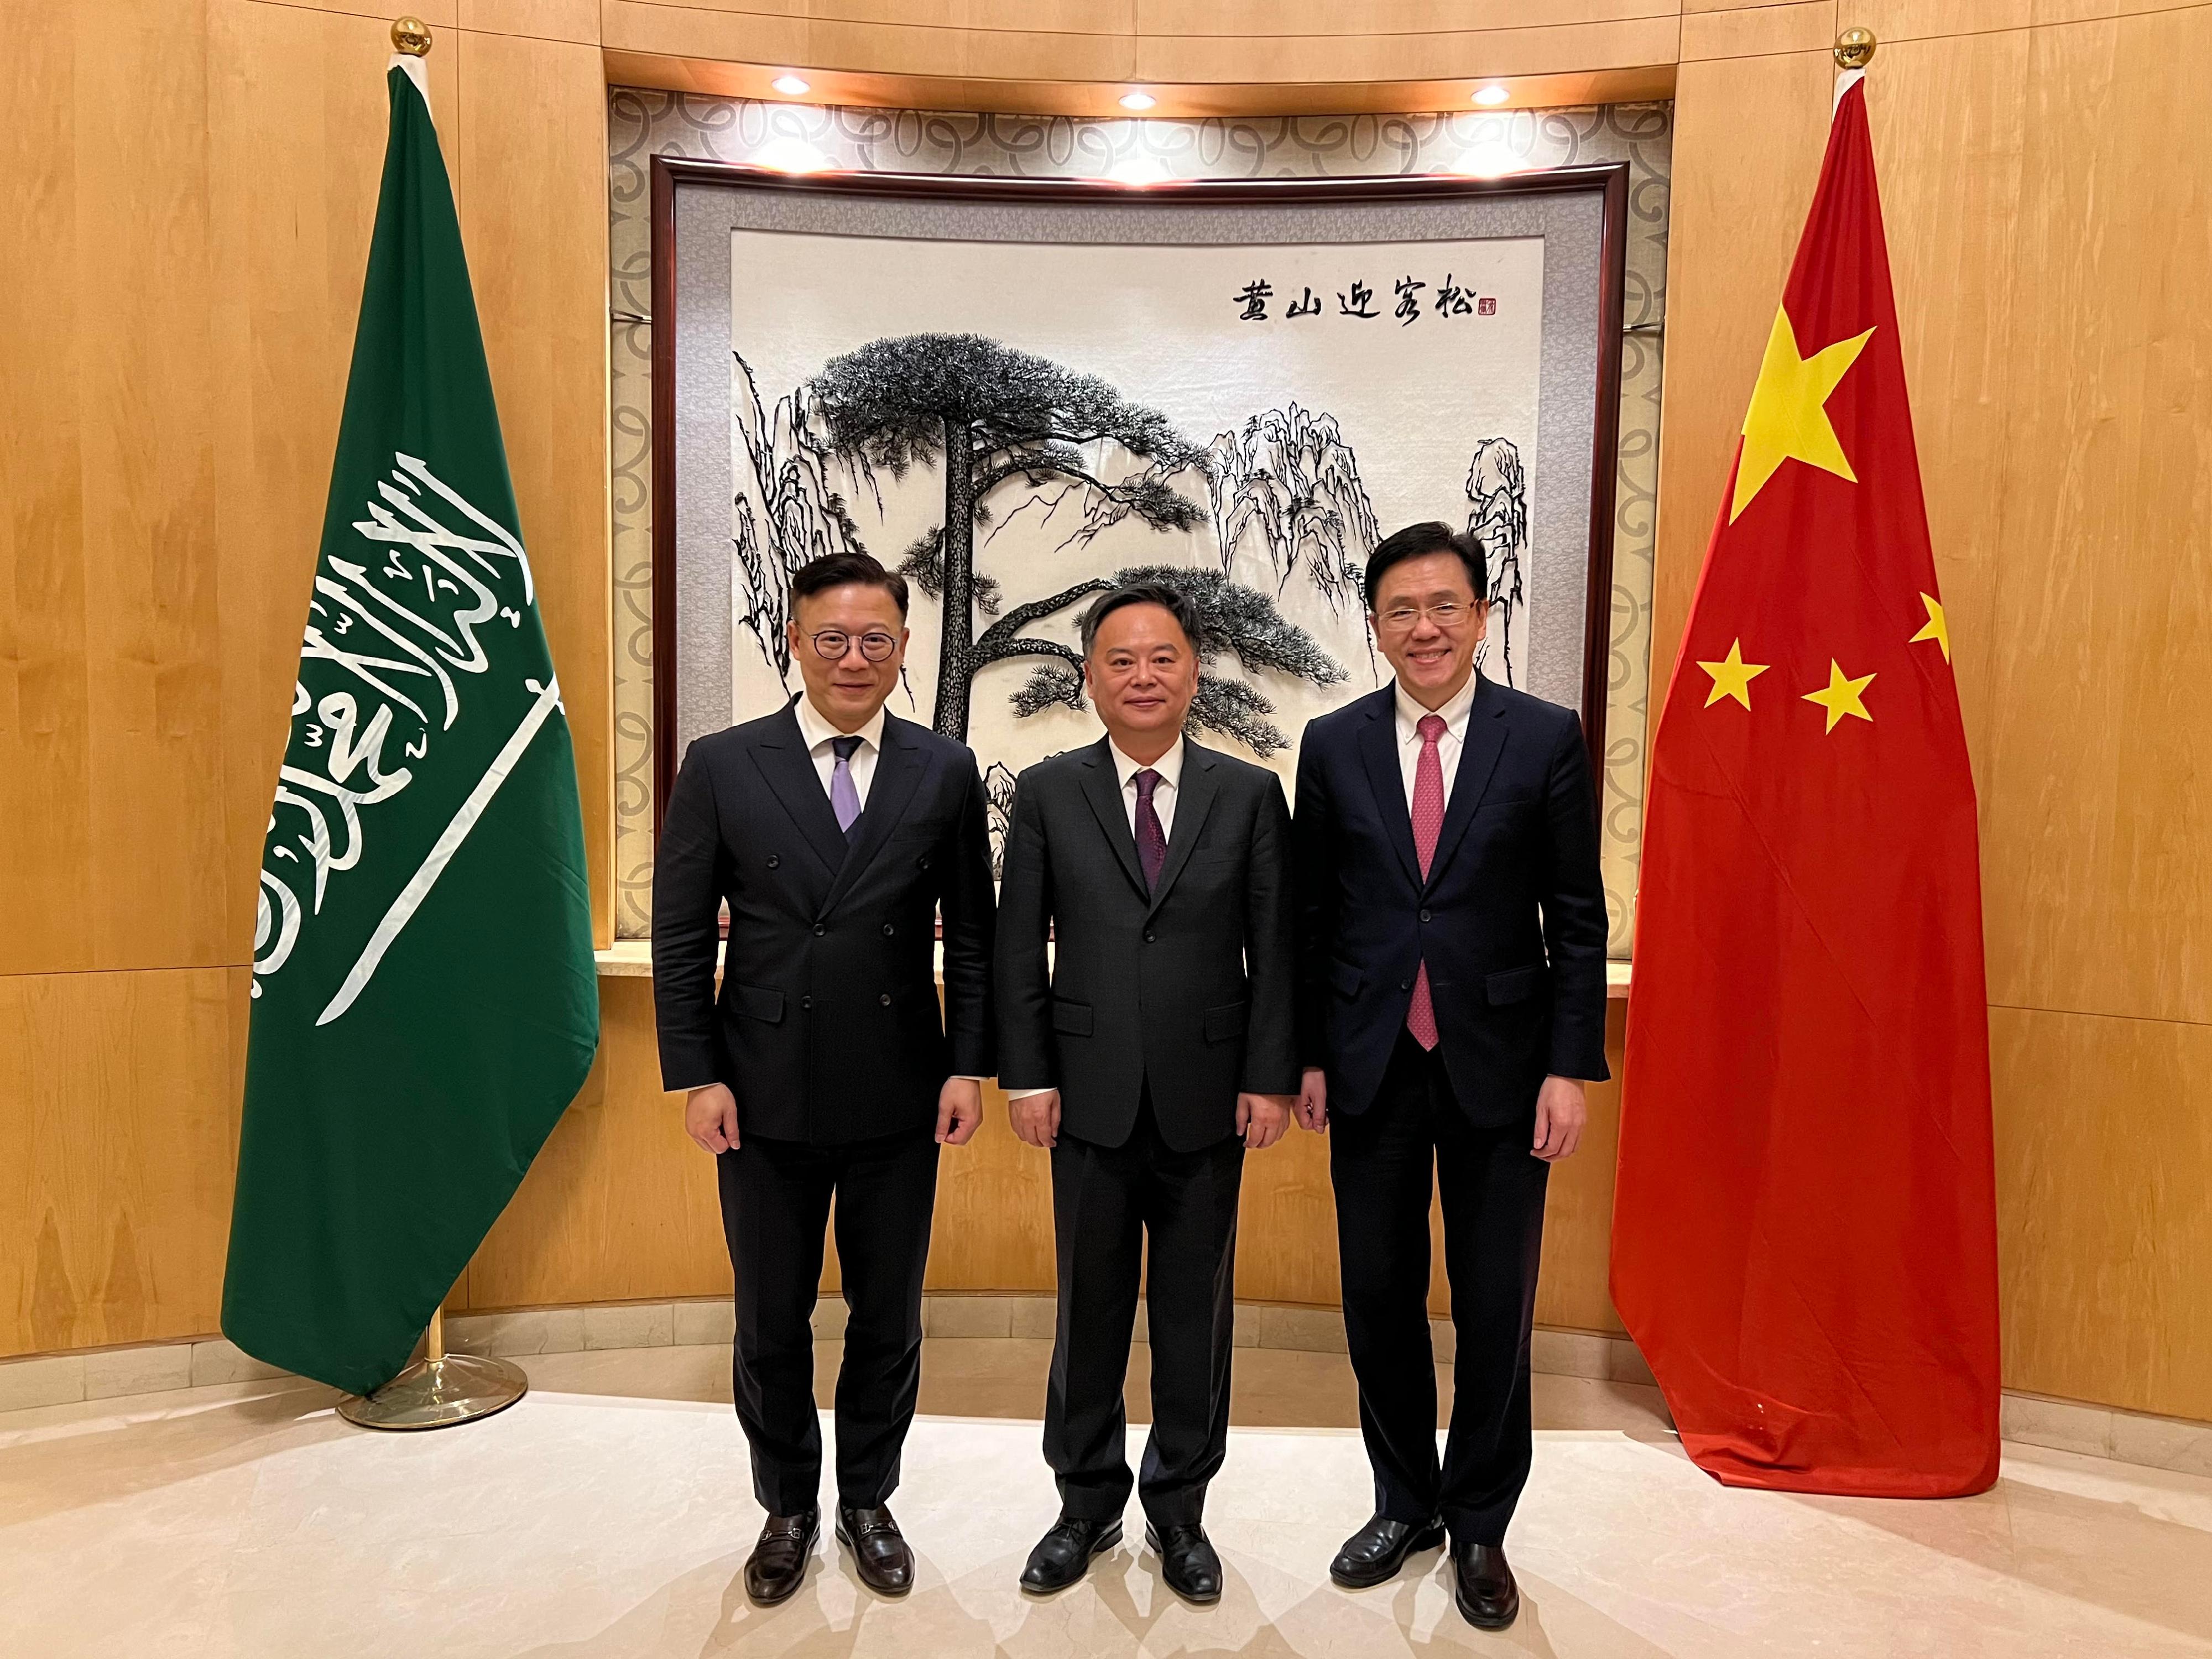 The Secretary for Innovation, Technology and Industry, Professor Sun Dong (right), and the Deputy Secretary for Justice, Mr Cheung Kwok-kwan (left), who is paying a duty visit there at the same time, called on the Ambassador Extraordinary and Plenipotentiary of the People's Republic of China to the Kingdom of Saudi Arabia, Mr Chen Weiqing (centre) on March 4 (Riyadh time).
